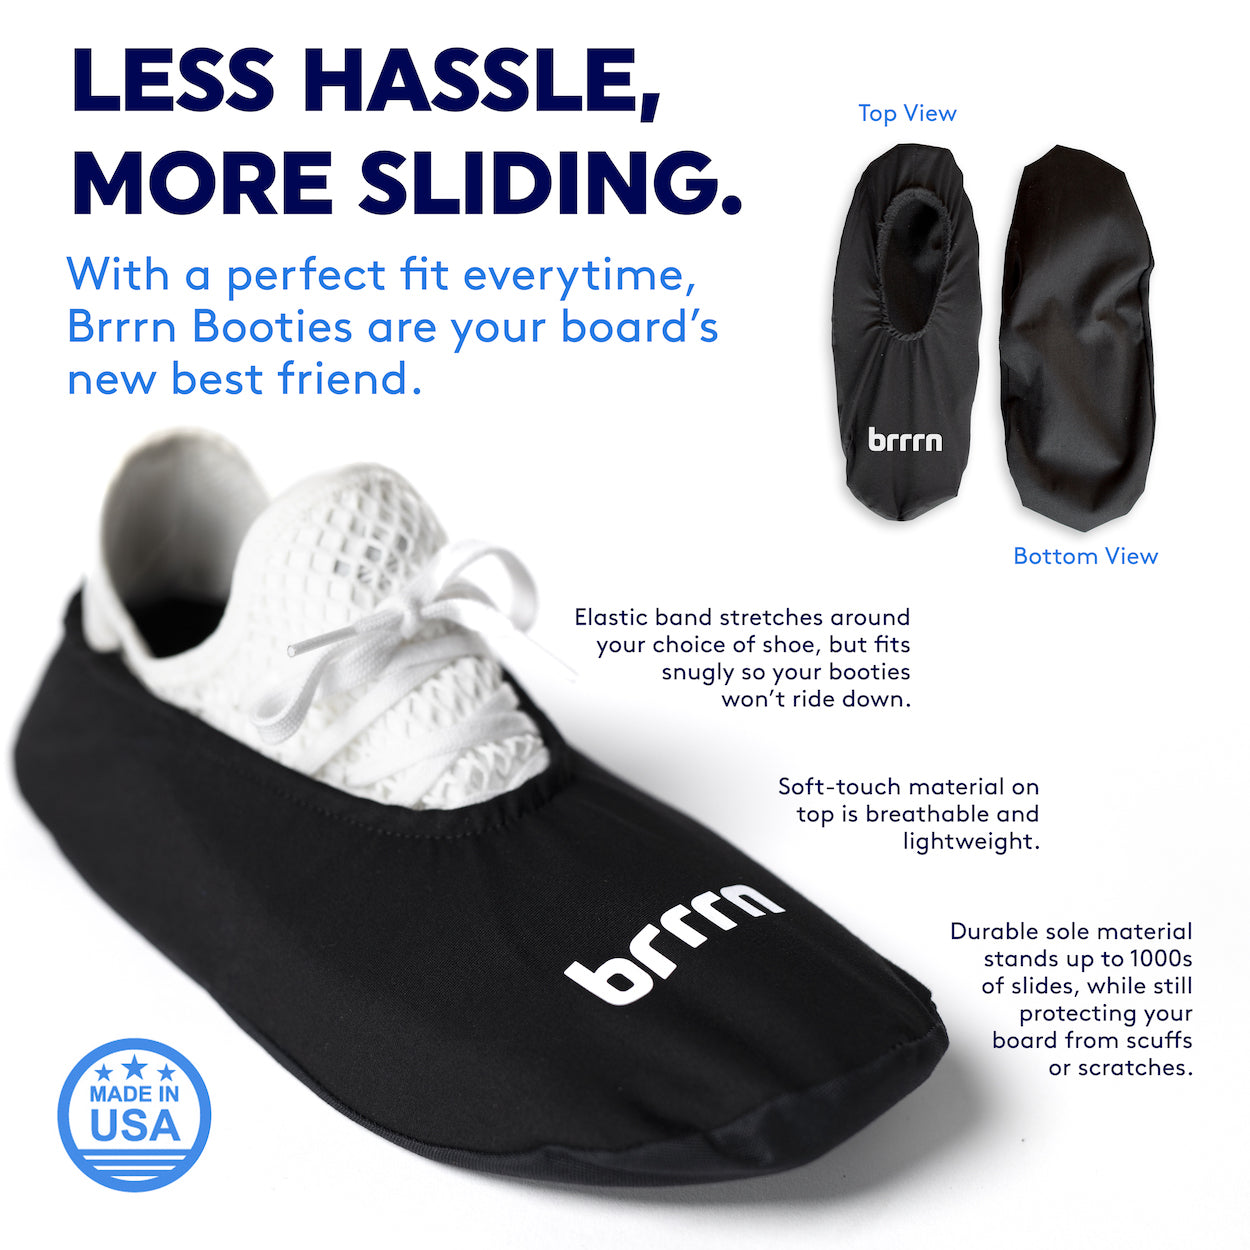 Less hassle, more sliding. With a perfect fit everytime, Brrrn Booties are your board's best friend. Elastic band stretches around your choice of shoe, but fits snugly so your booties won't ride down. Soft-touch material on top is breathable and lightweight. Durable sole material stands up to 1000s of slides, while still protecting your board from scuffs and scratches.